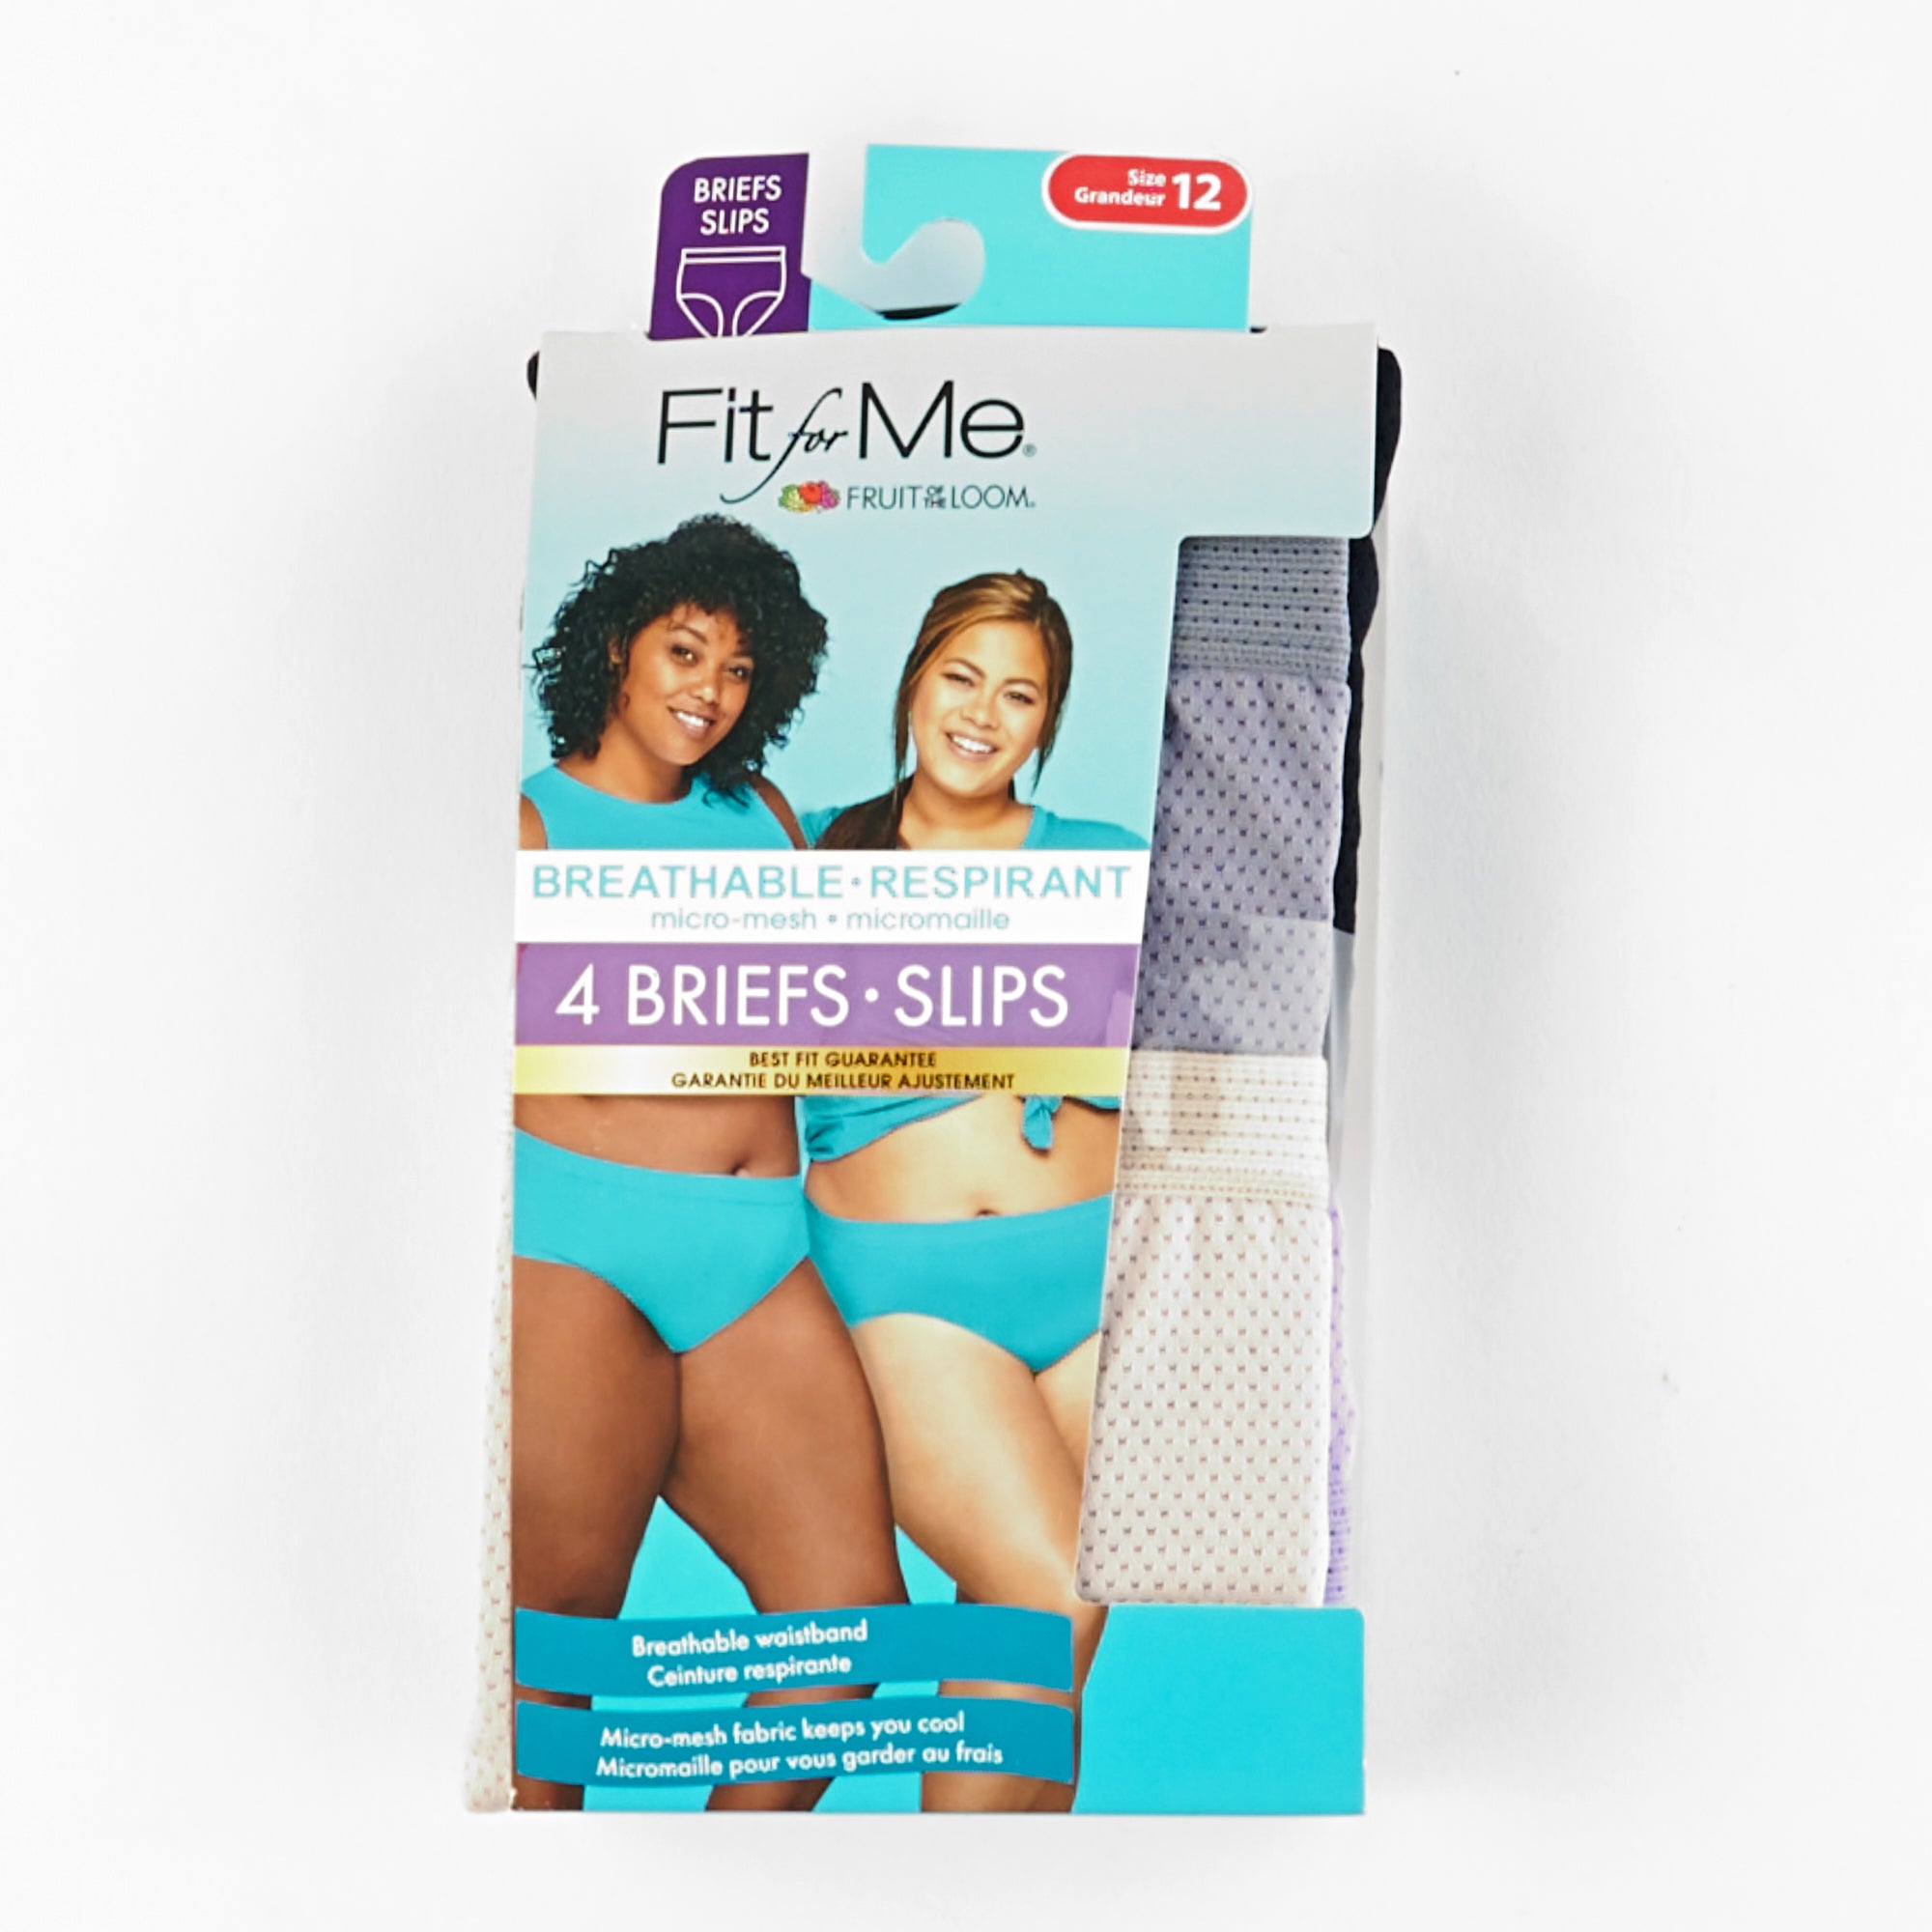 Fruit of the Loom Women's Fit for Me Cotton Briefs, 12, 4 Pack